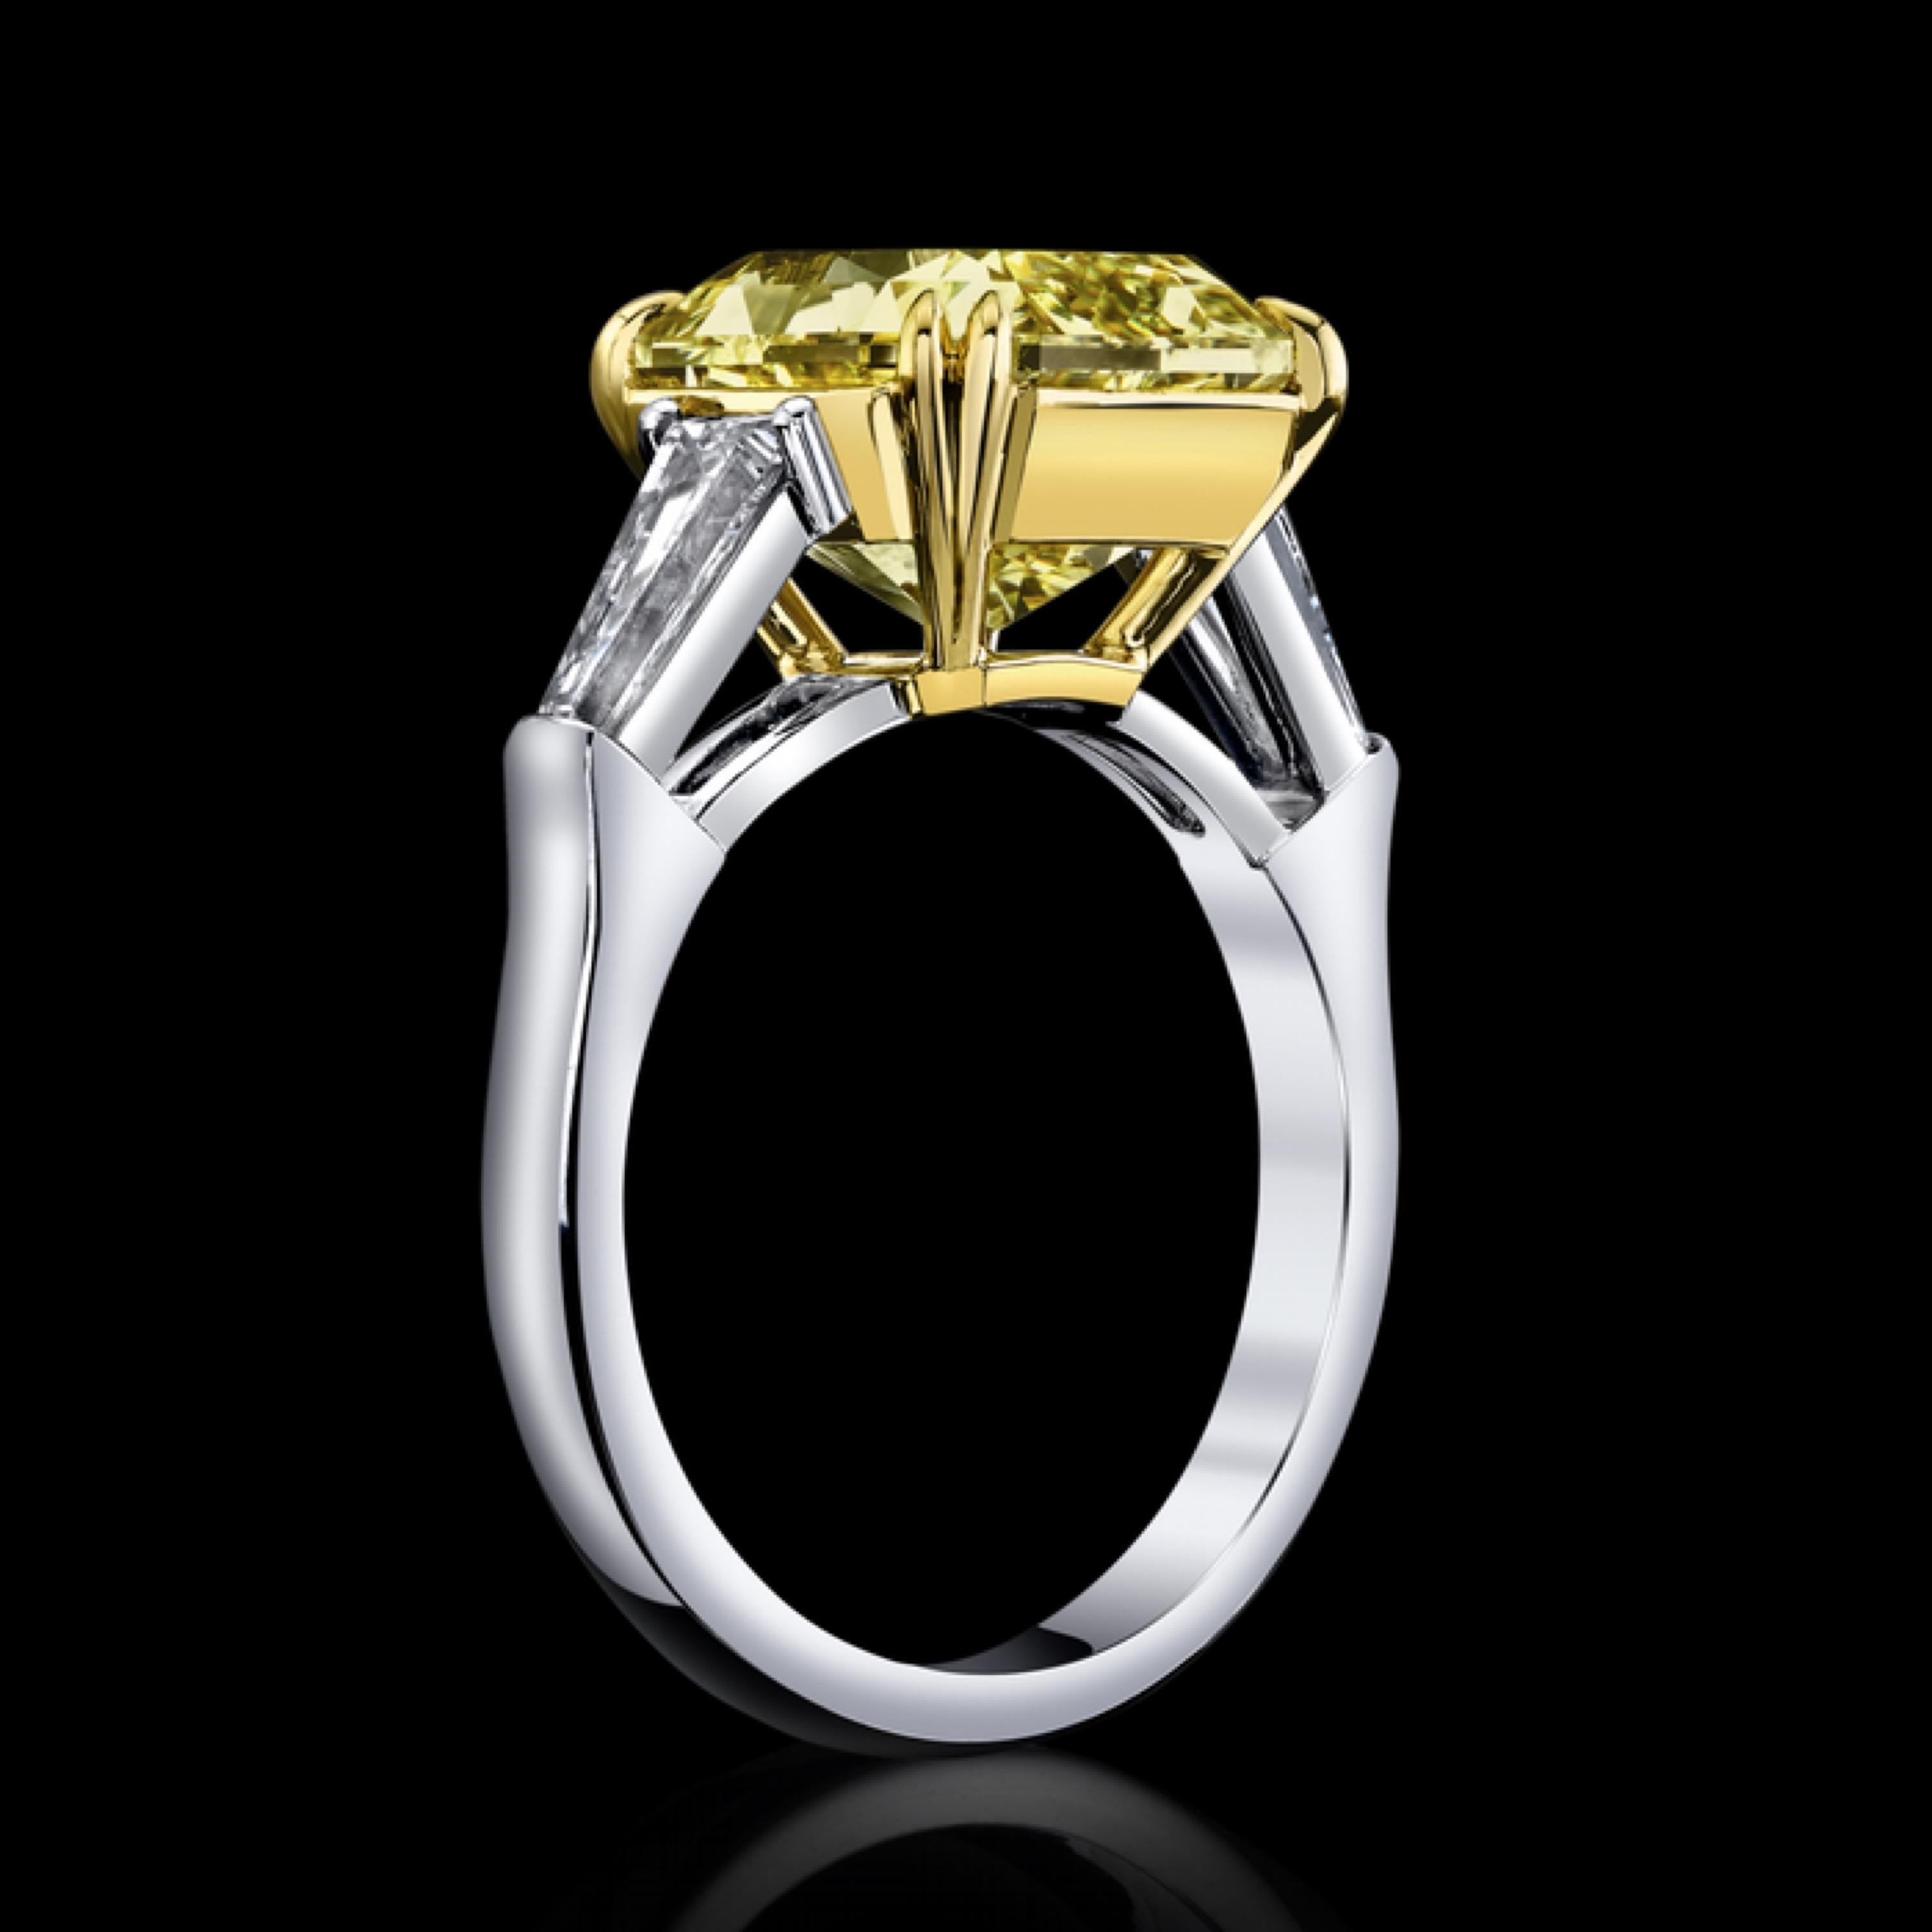 From the Emilio Jewelry Vault, Showcasing a stunning 6.50 carat Gia Certified natural fancy pure yellow diamond center. What makes this diamond even more special is the magnificent sparkle and attention it brings to itself. 
Please inquire for more